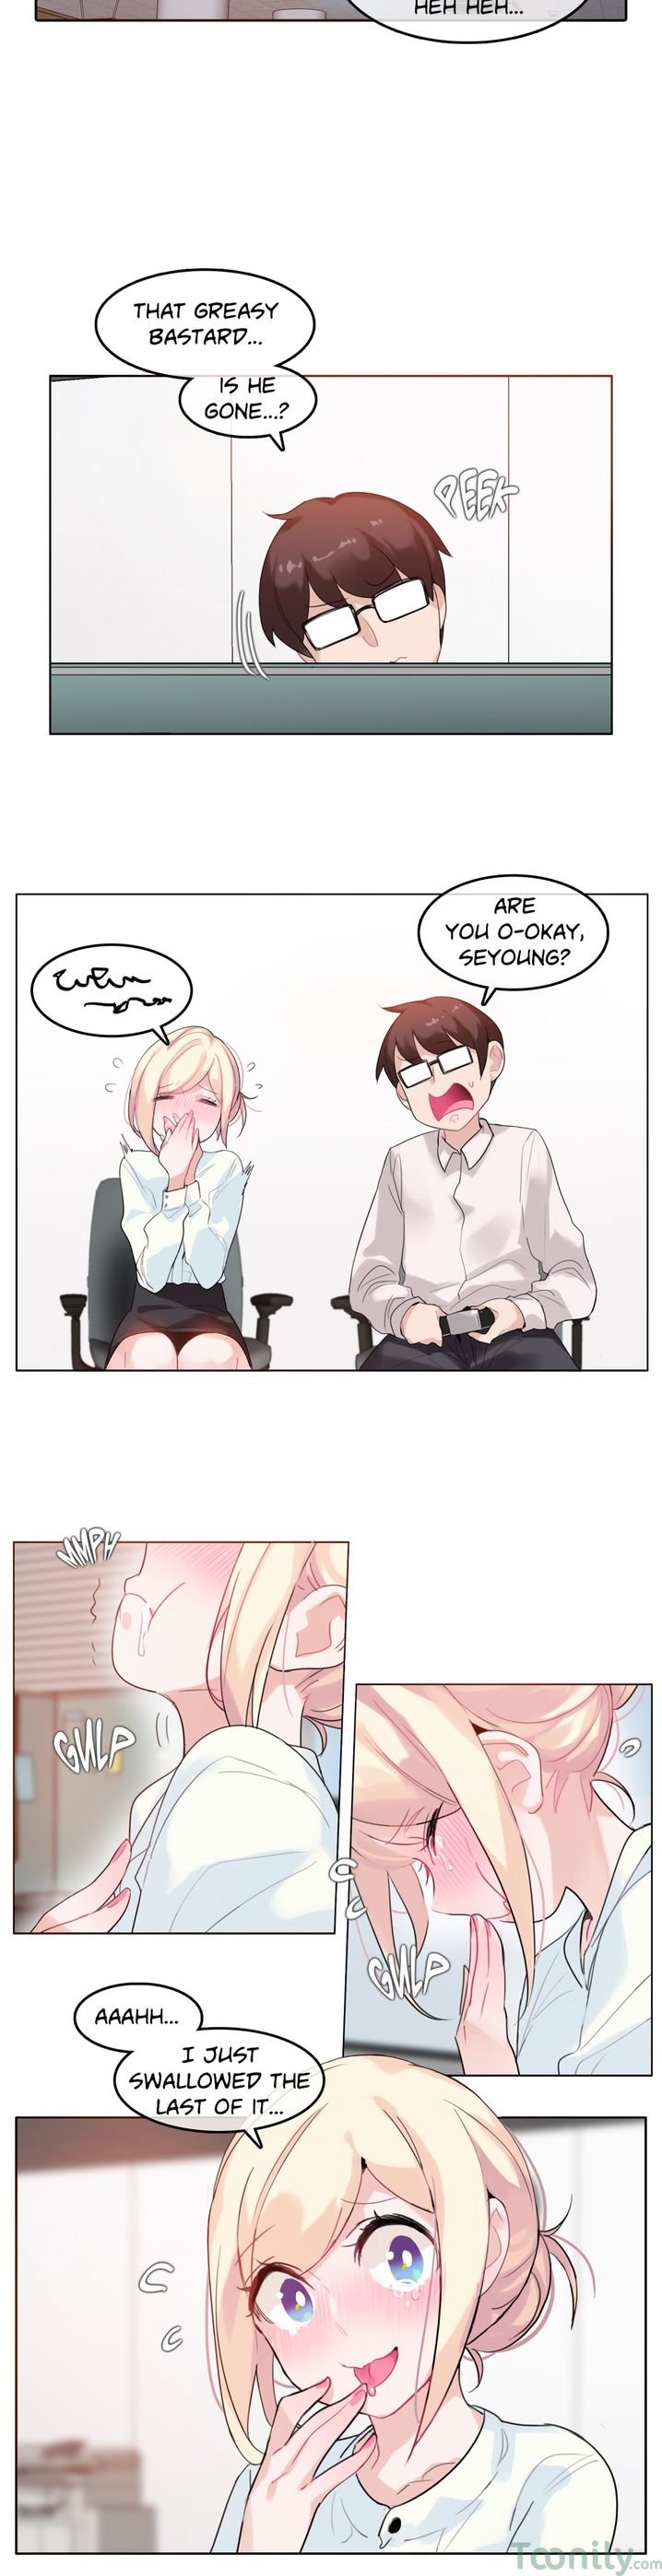 a-perverts-daily-life-chap-32-3